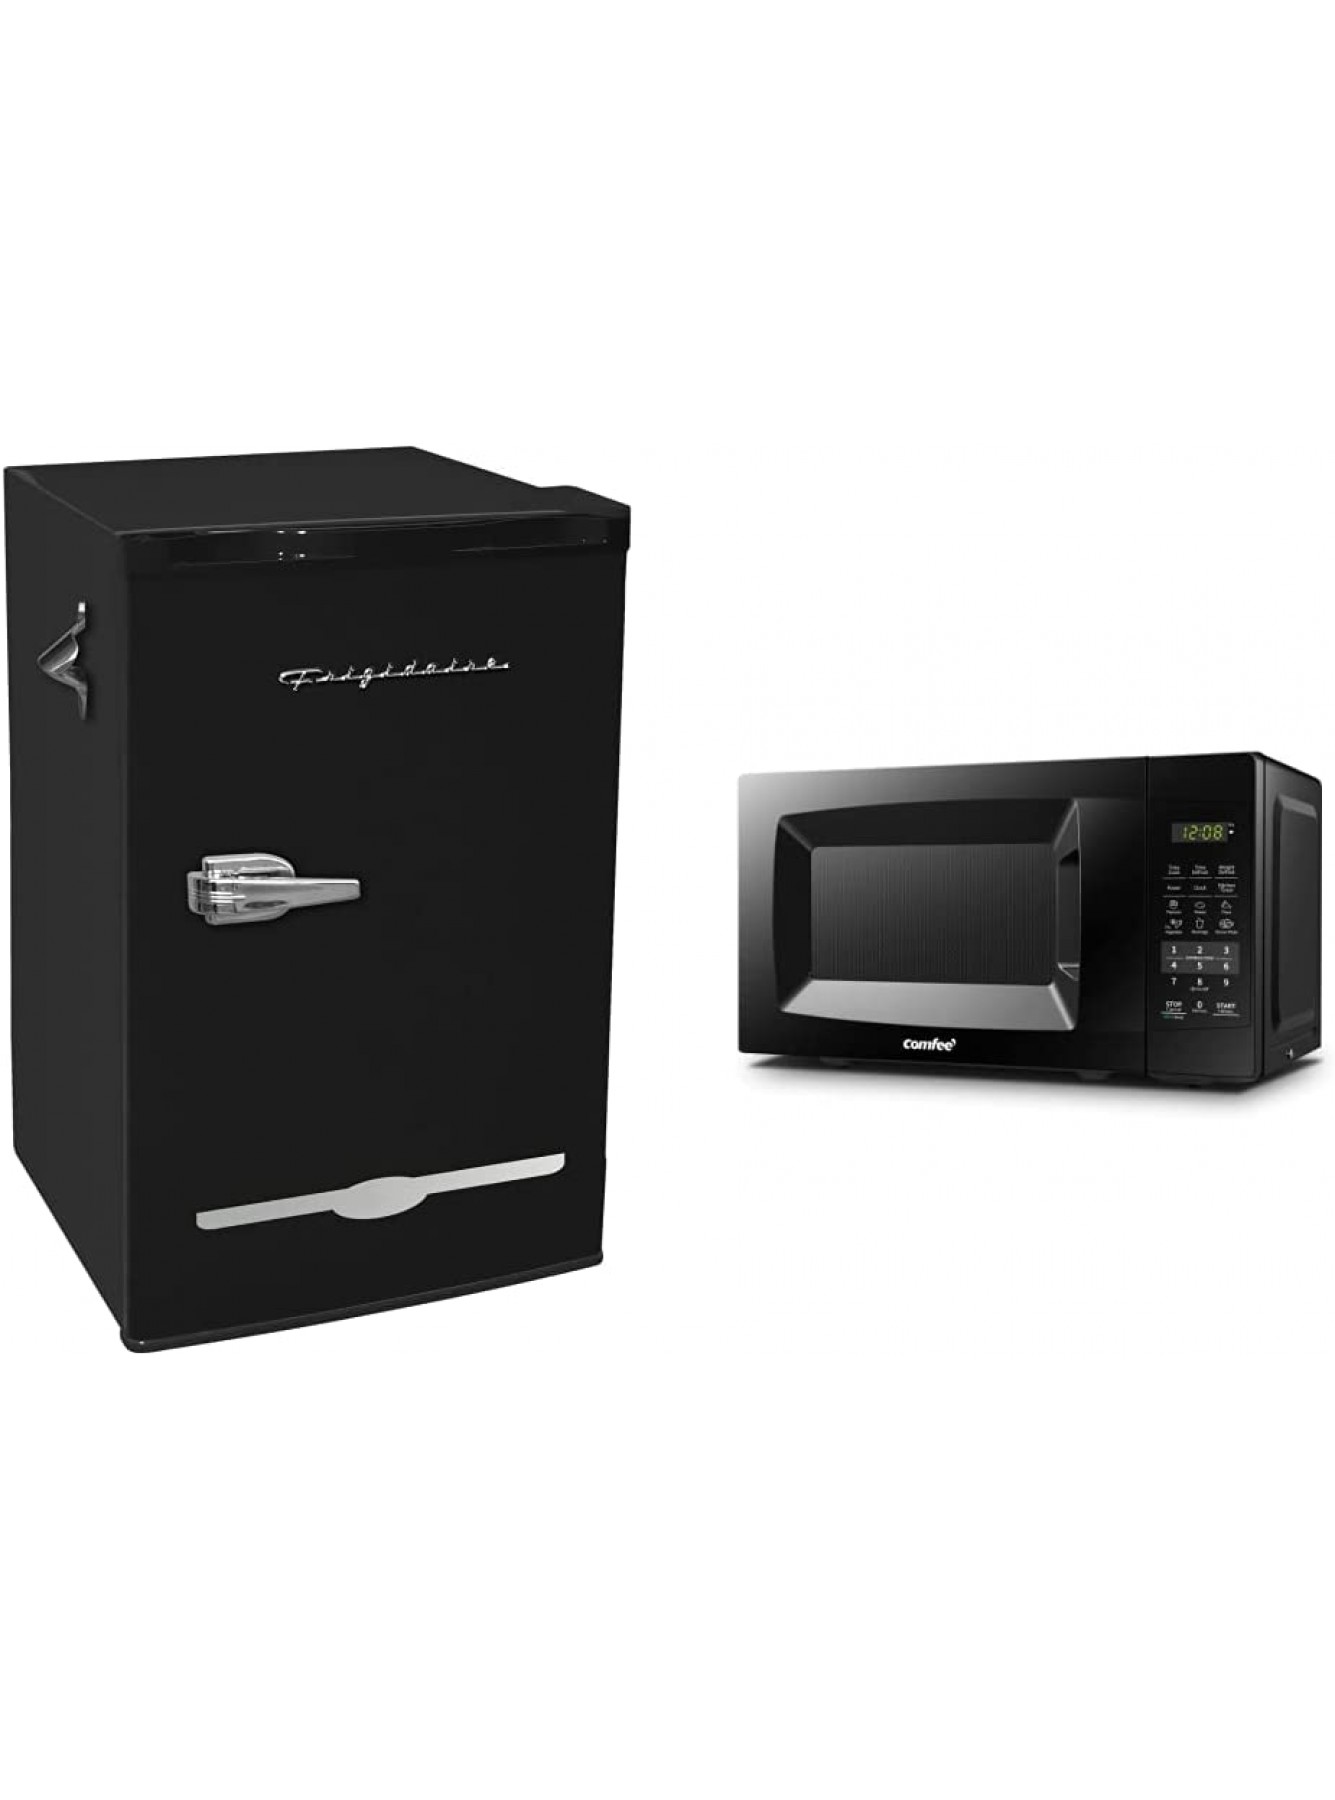 FRIGIDAIRE EFR376-BLACK 3.1 Cu Ft Black Retro Bar Fridge & COMFEE' EM720CPL-PMB Countertop Microwave Oven with Sound On Off ECO Mode and Easy One-Touch Buttons 0.7cu.ft 700W Black B0B4MRYRYJ